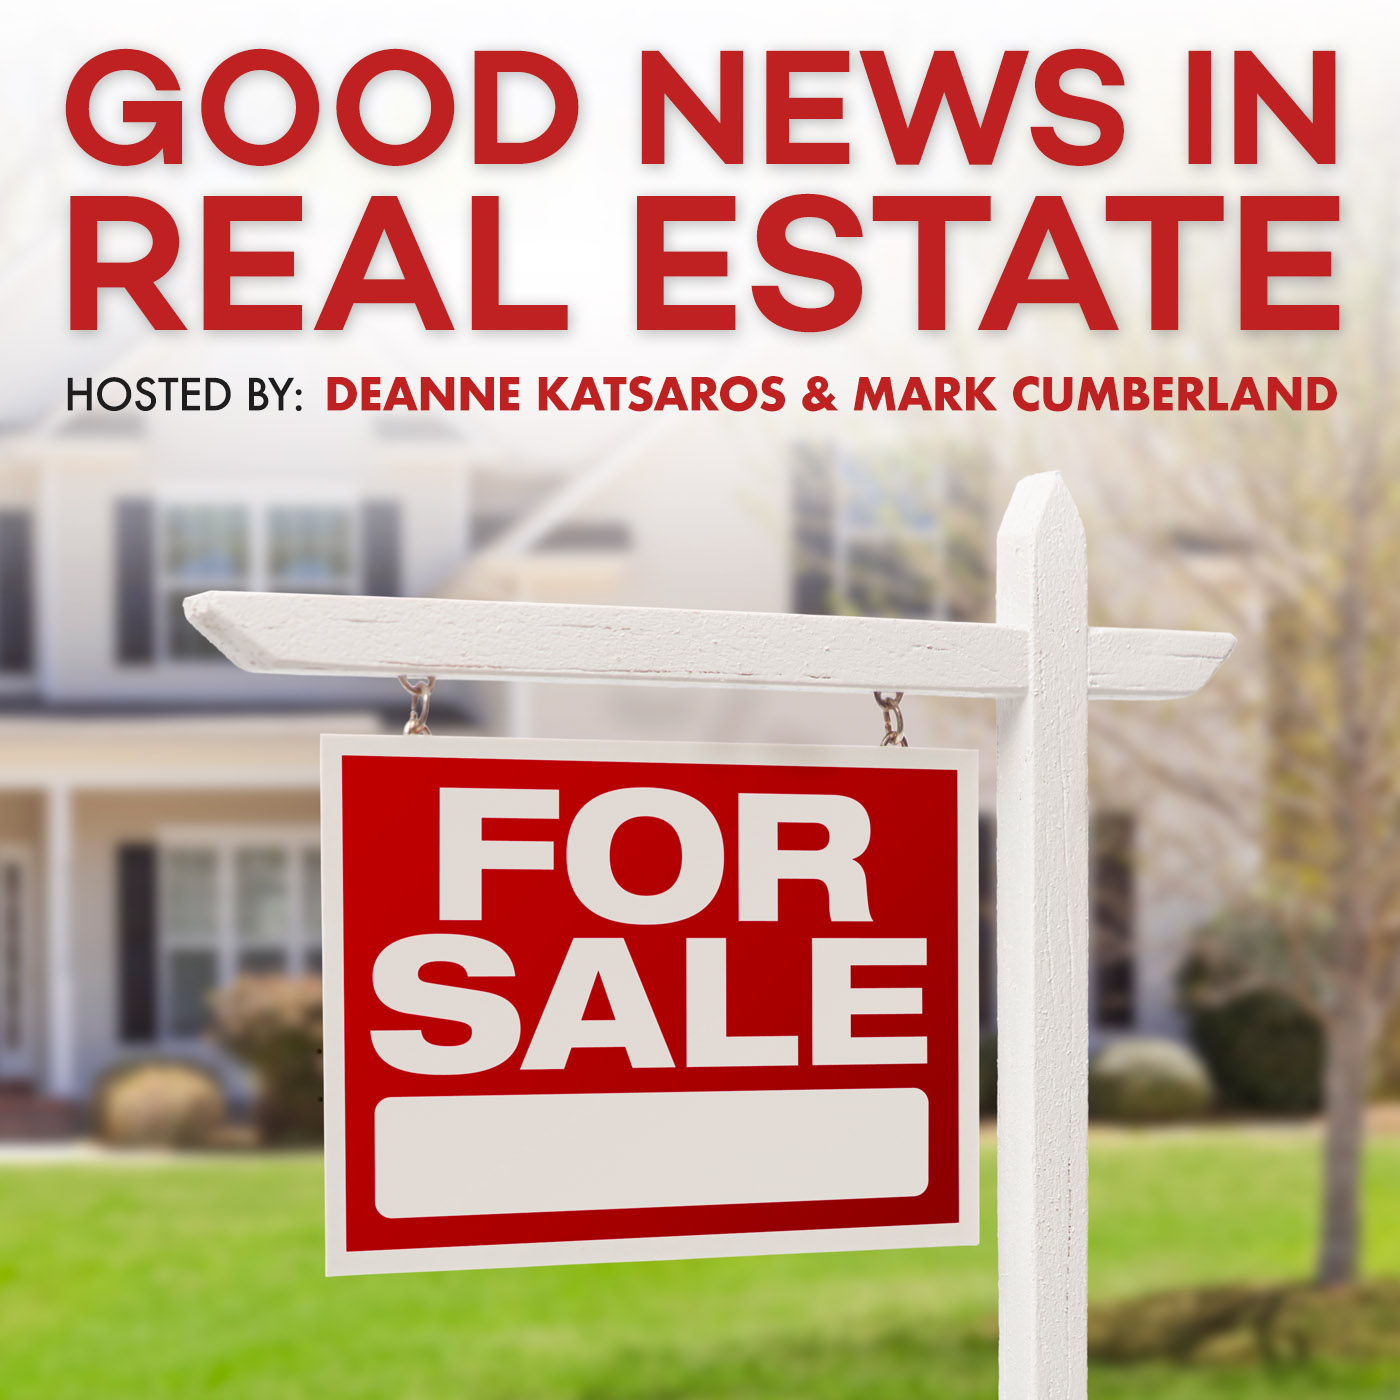 February 18, 2023 | Good News In Real Estate